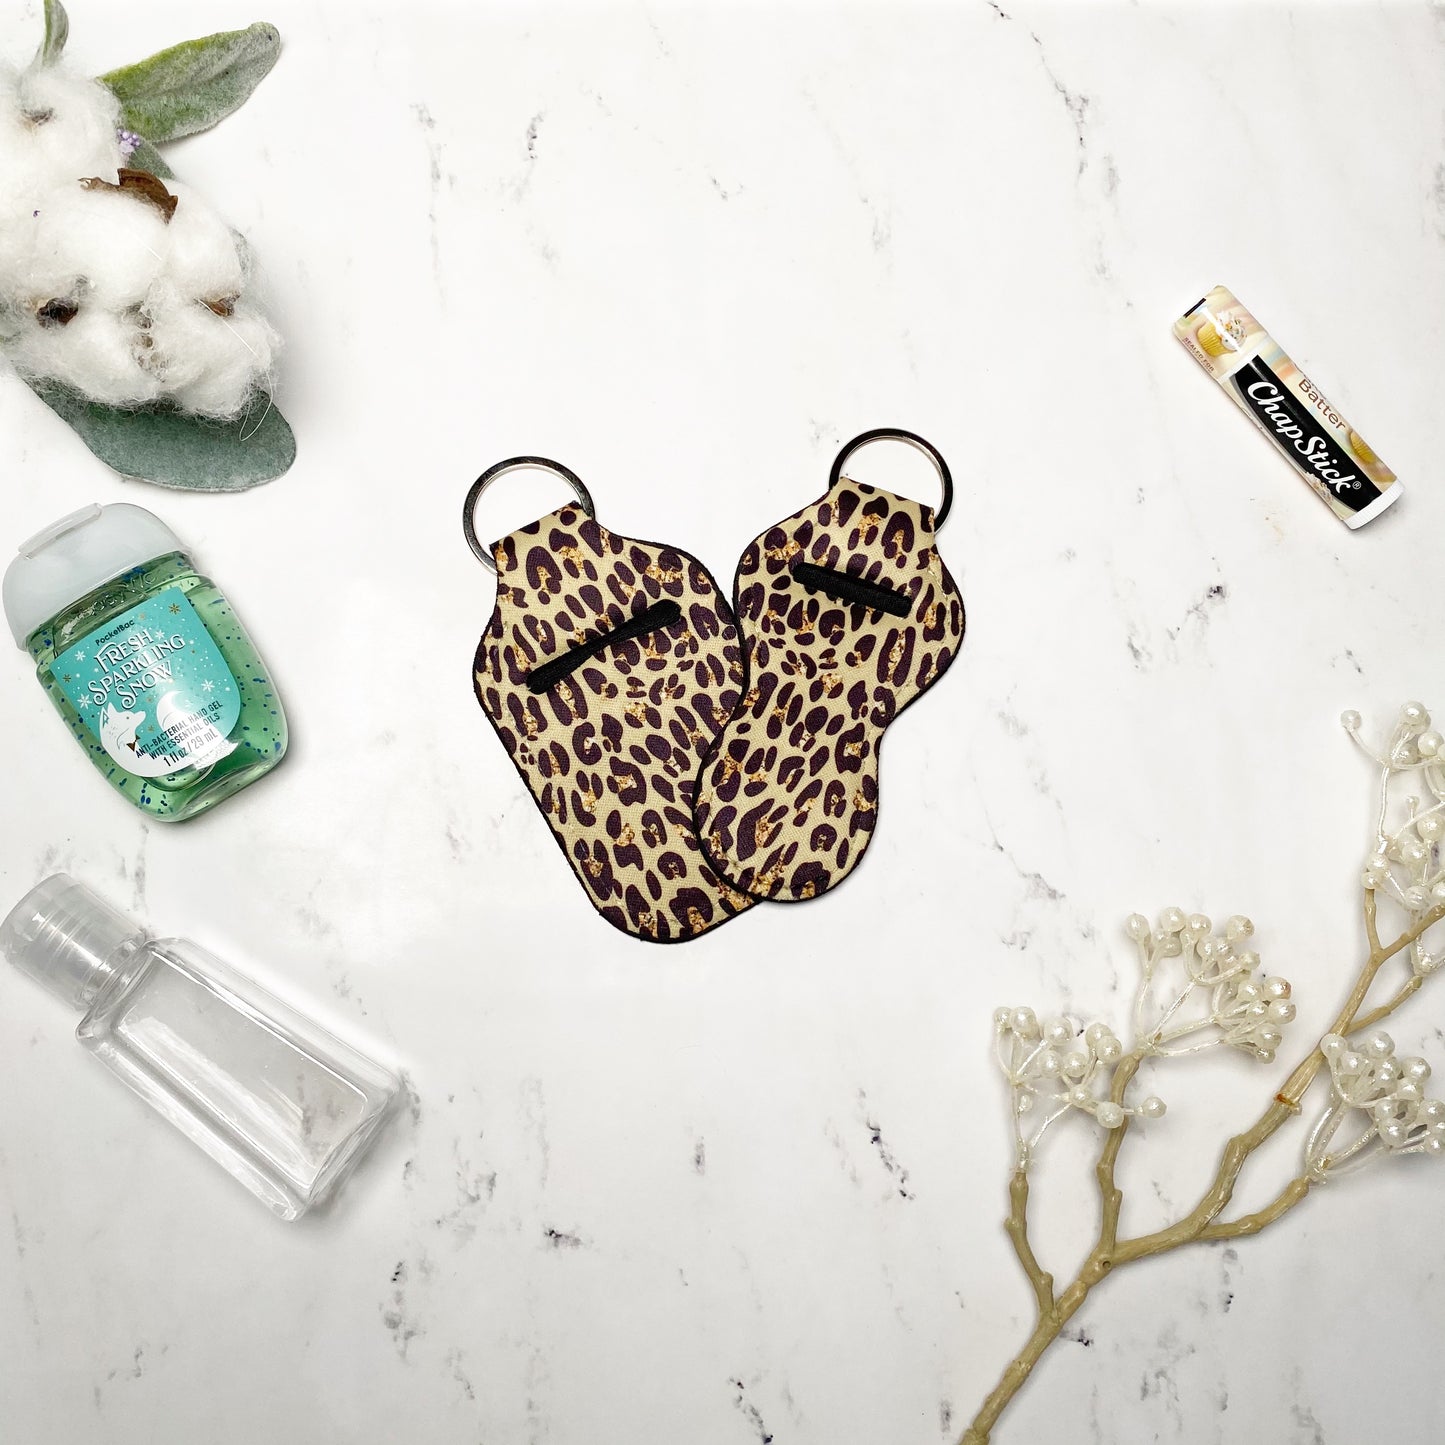 Leopard Print Lip Balm and Hand Sanitizer Holders